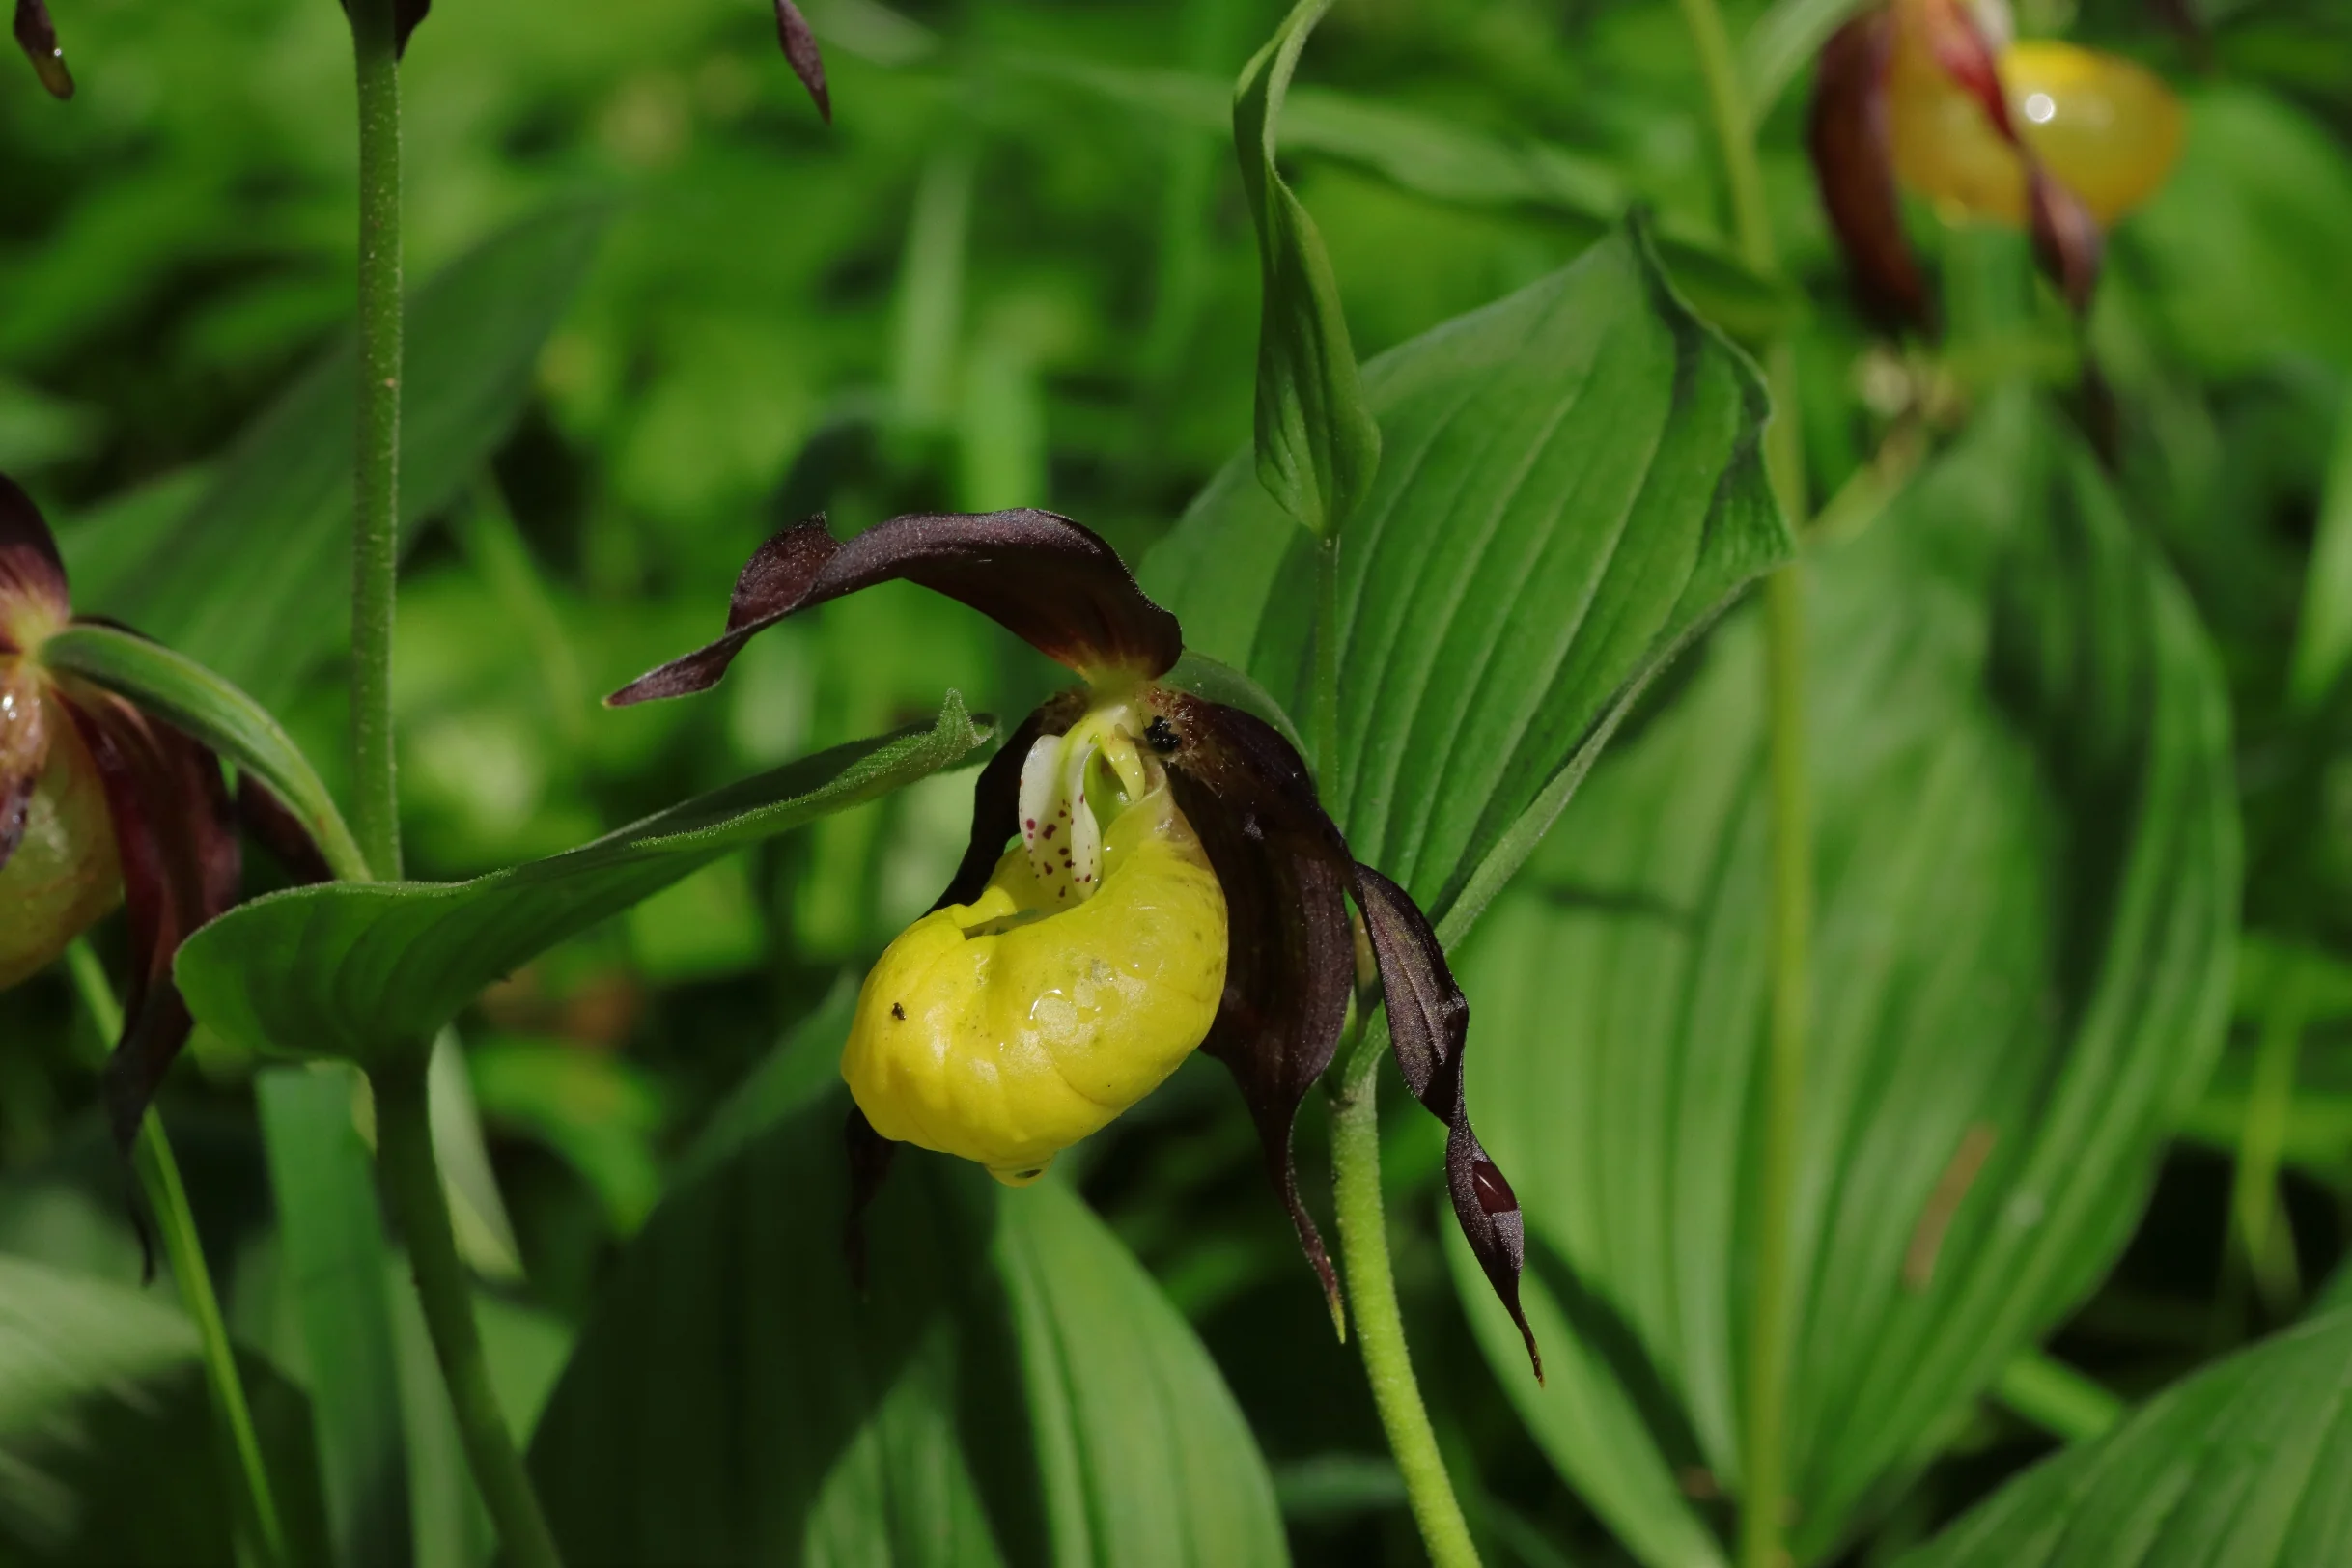 A group of lady's-slipper orchid